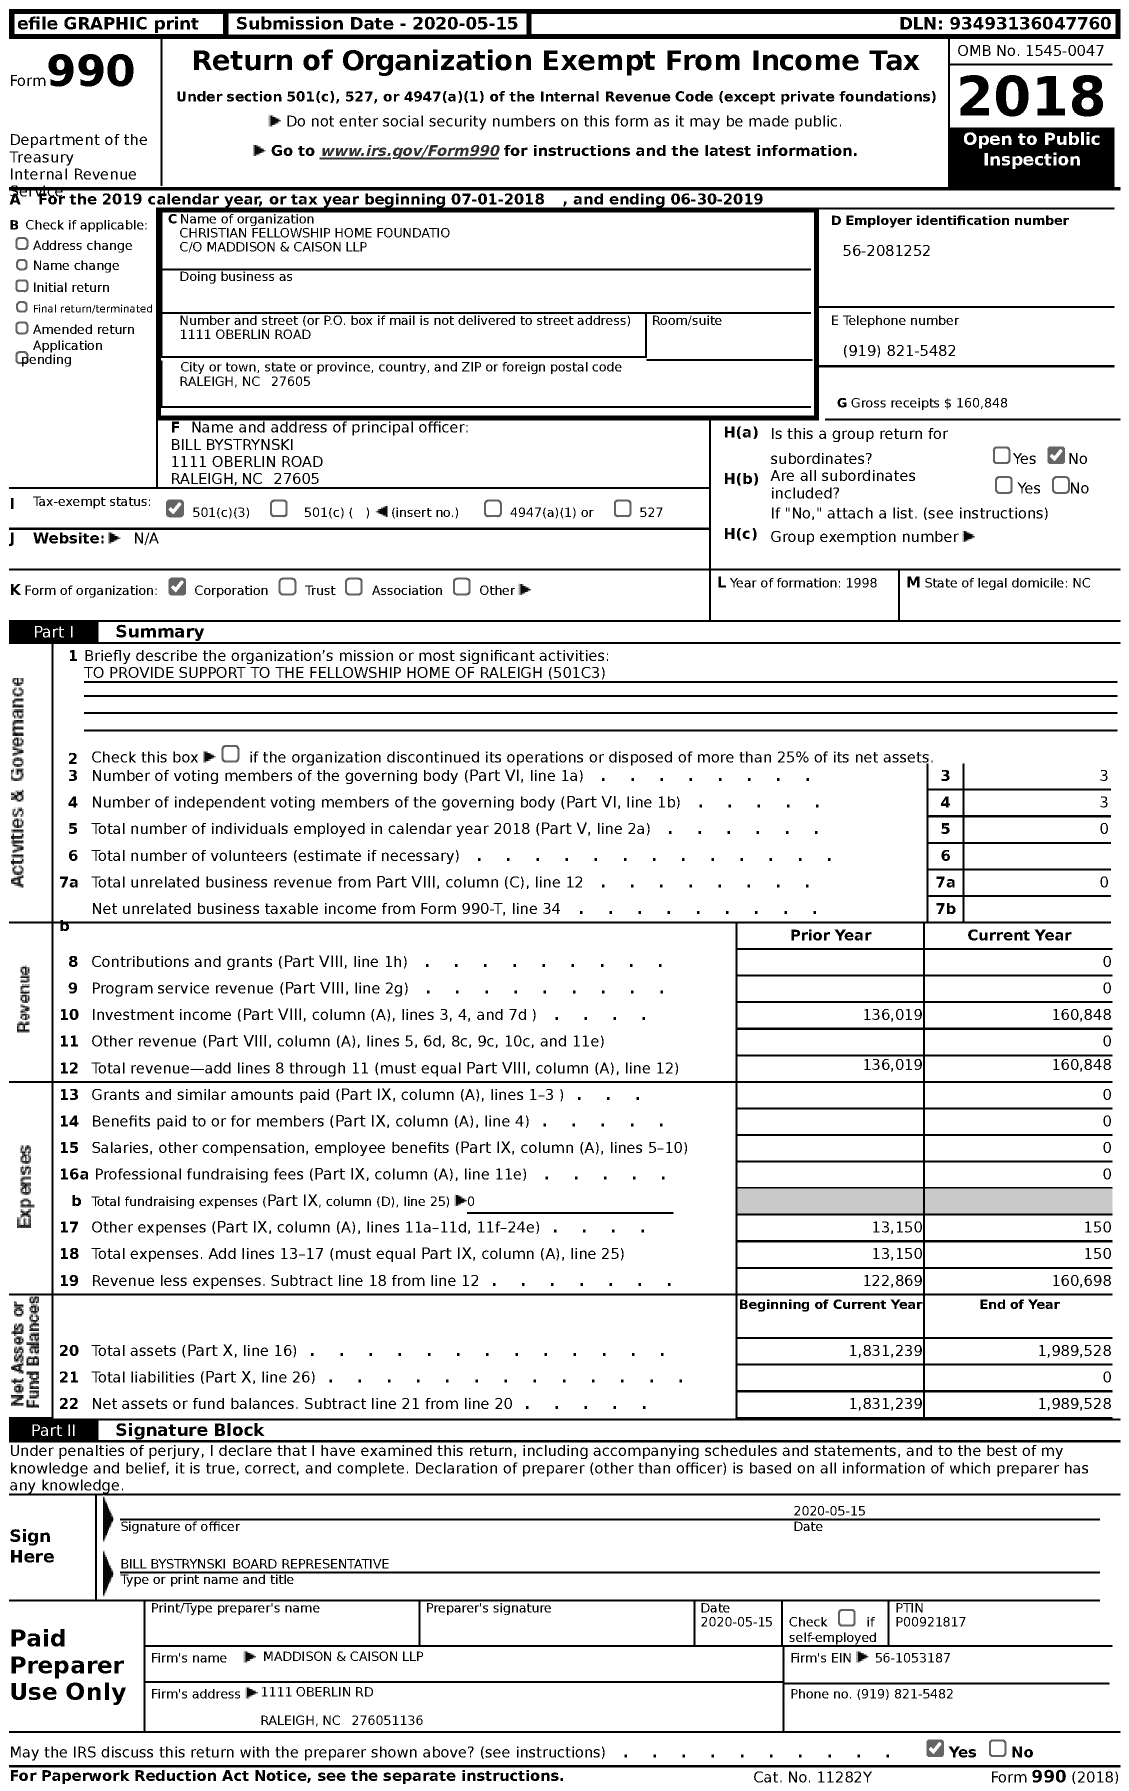 Image of first page of 2018 Form 990 for Christian Fellowship Home Foundation